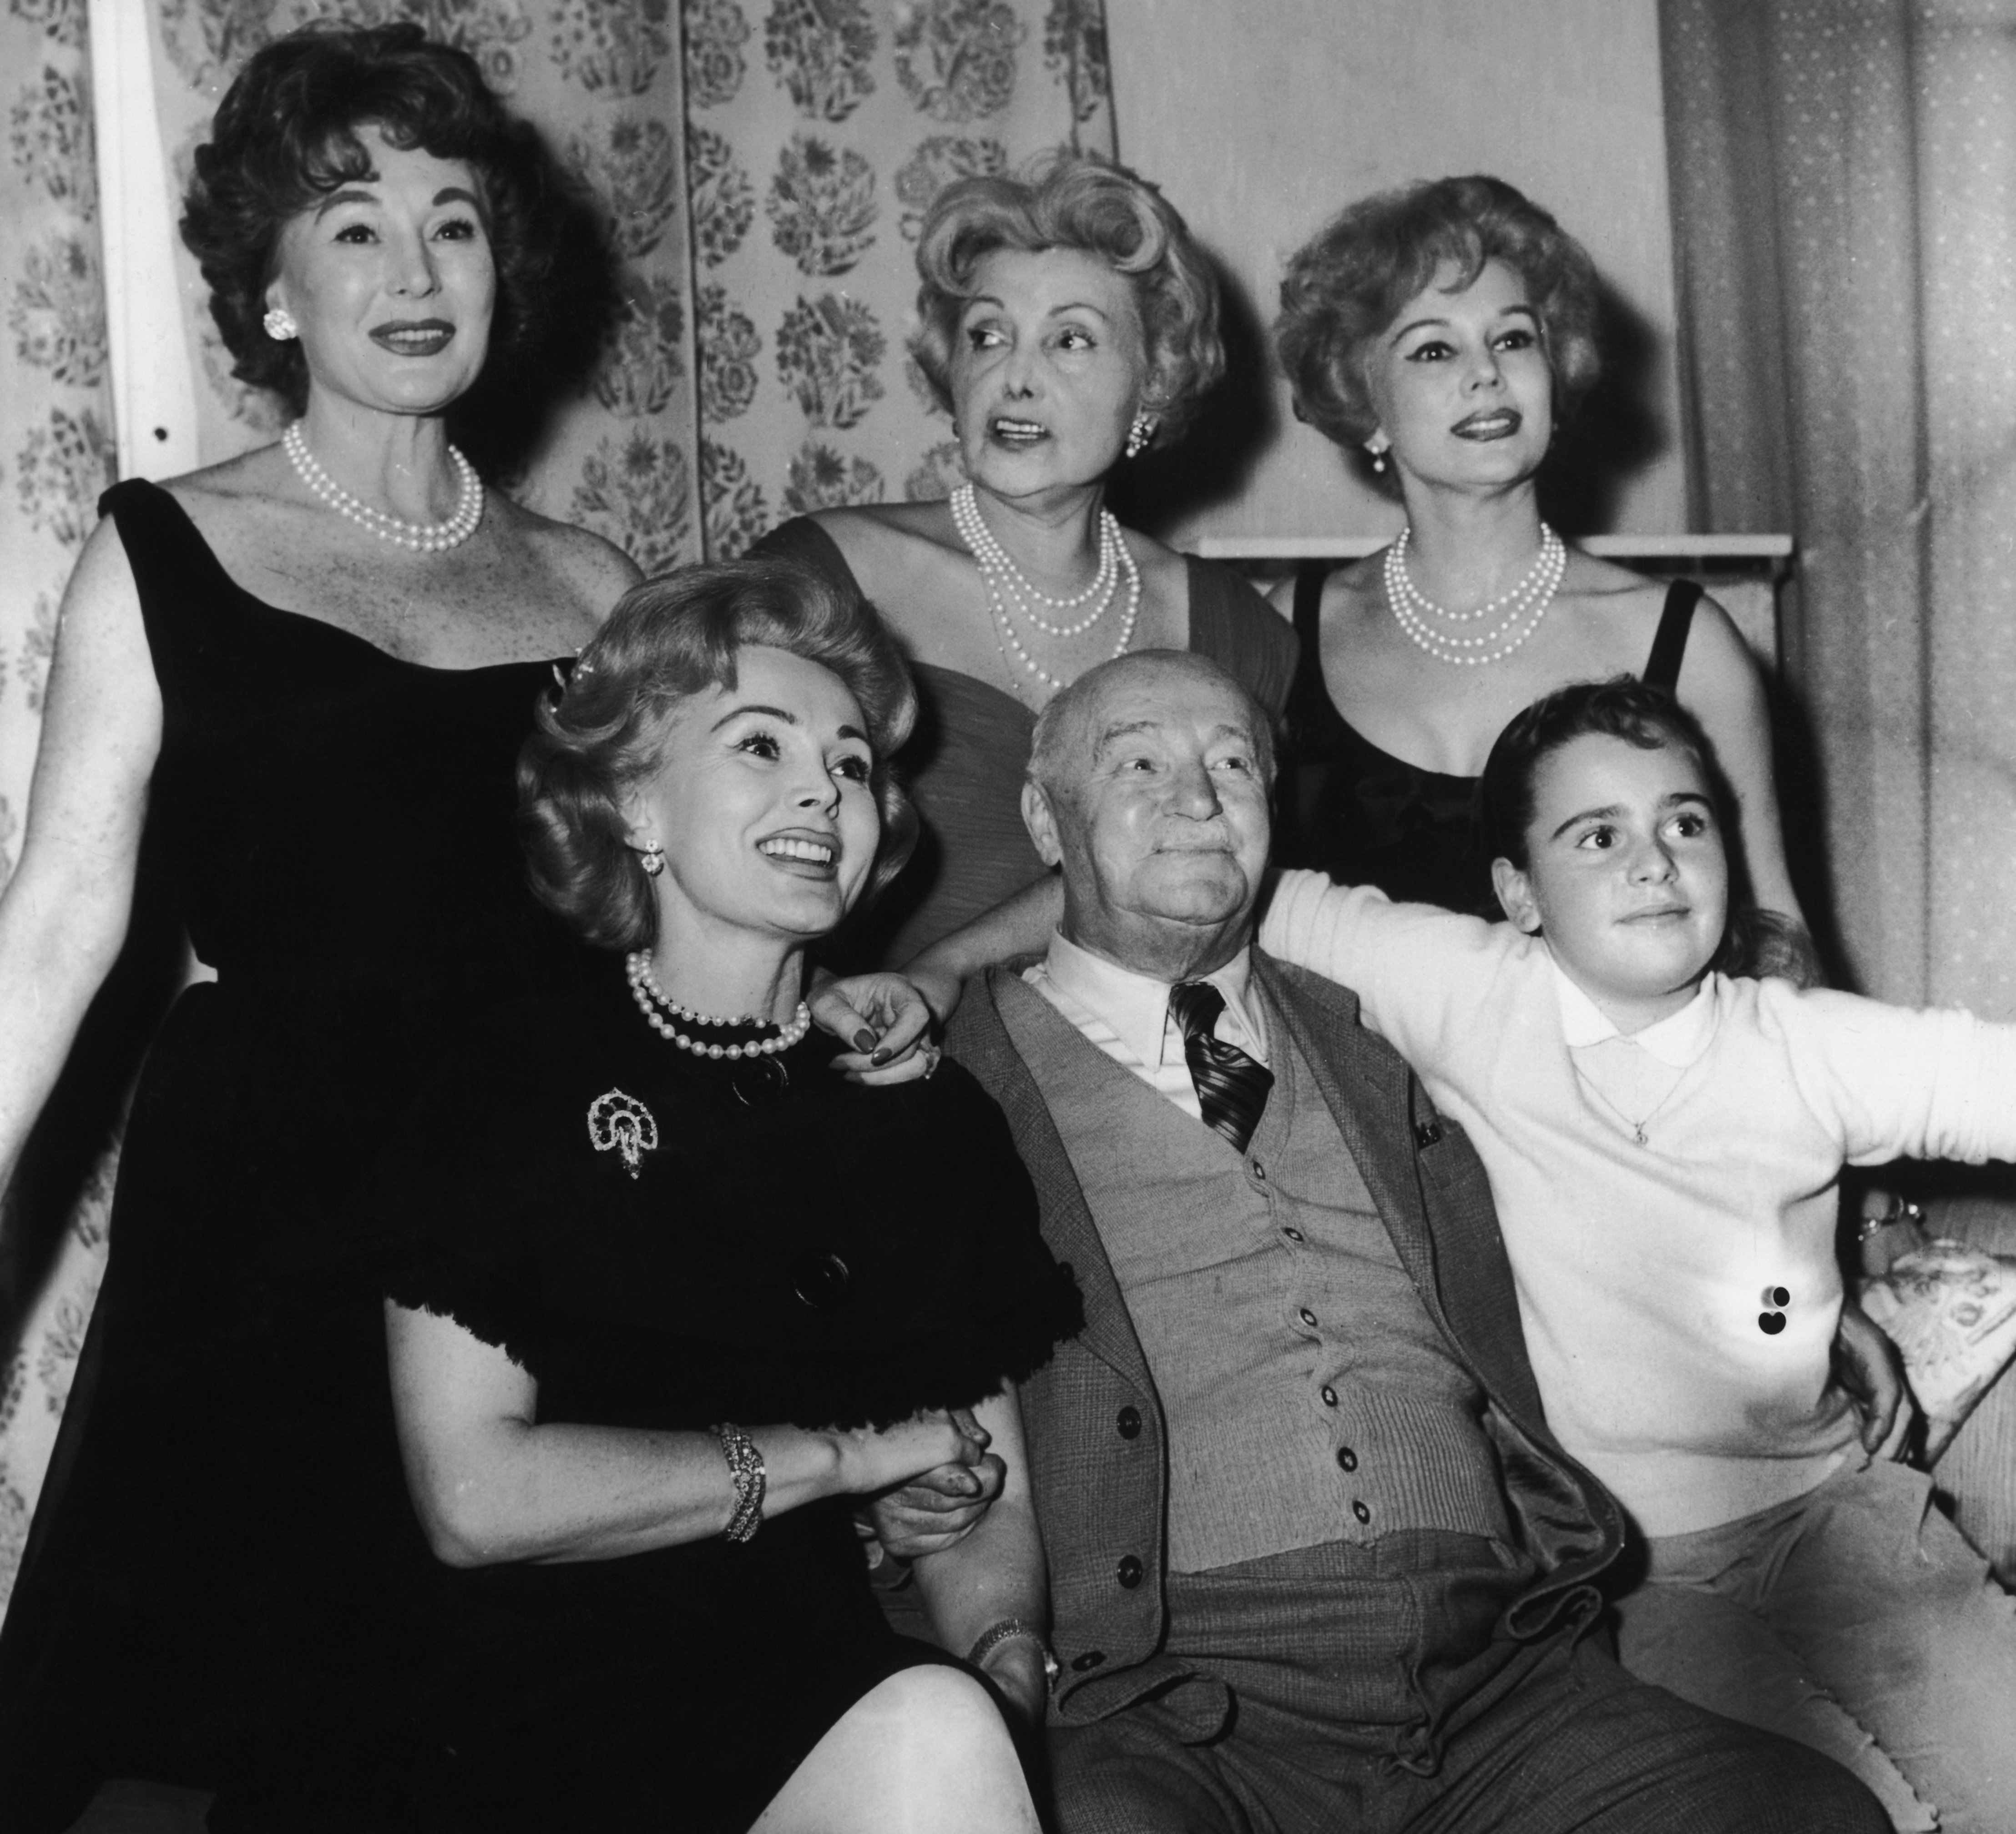 Hungarian actress and socialite Zsa Zsa Gabor with her family at the Hotel Sacher in Vienna, October 01, 1958. | Photo: Getty Images